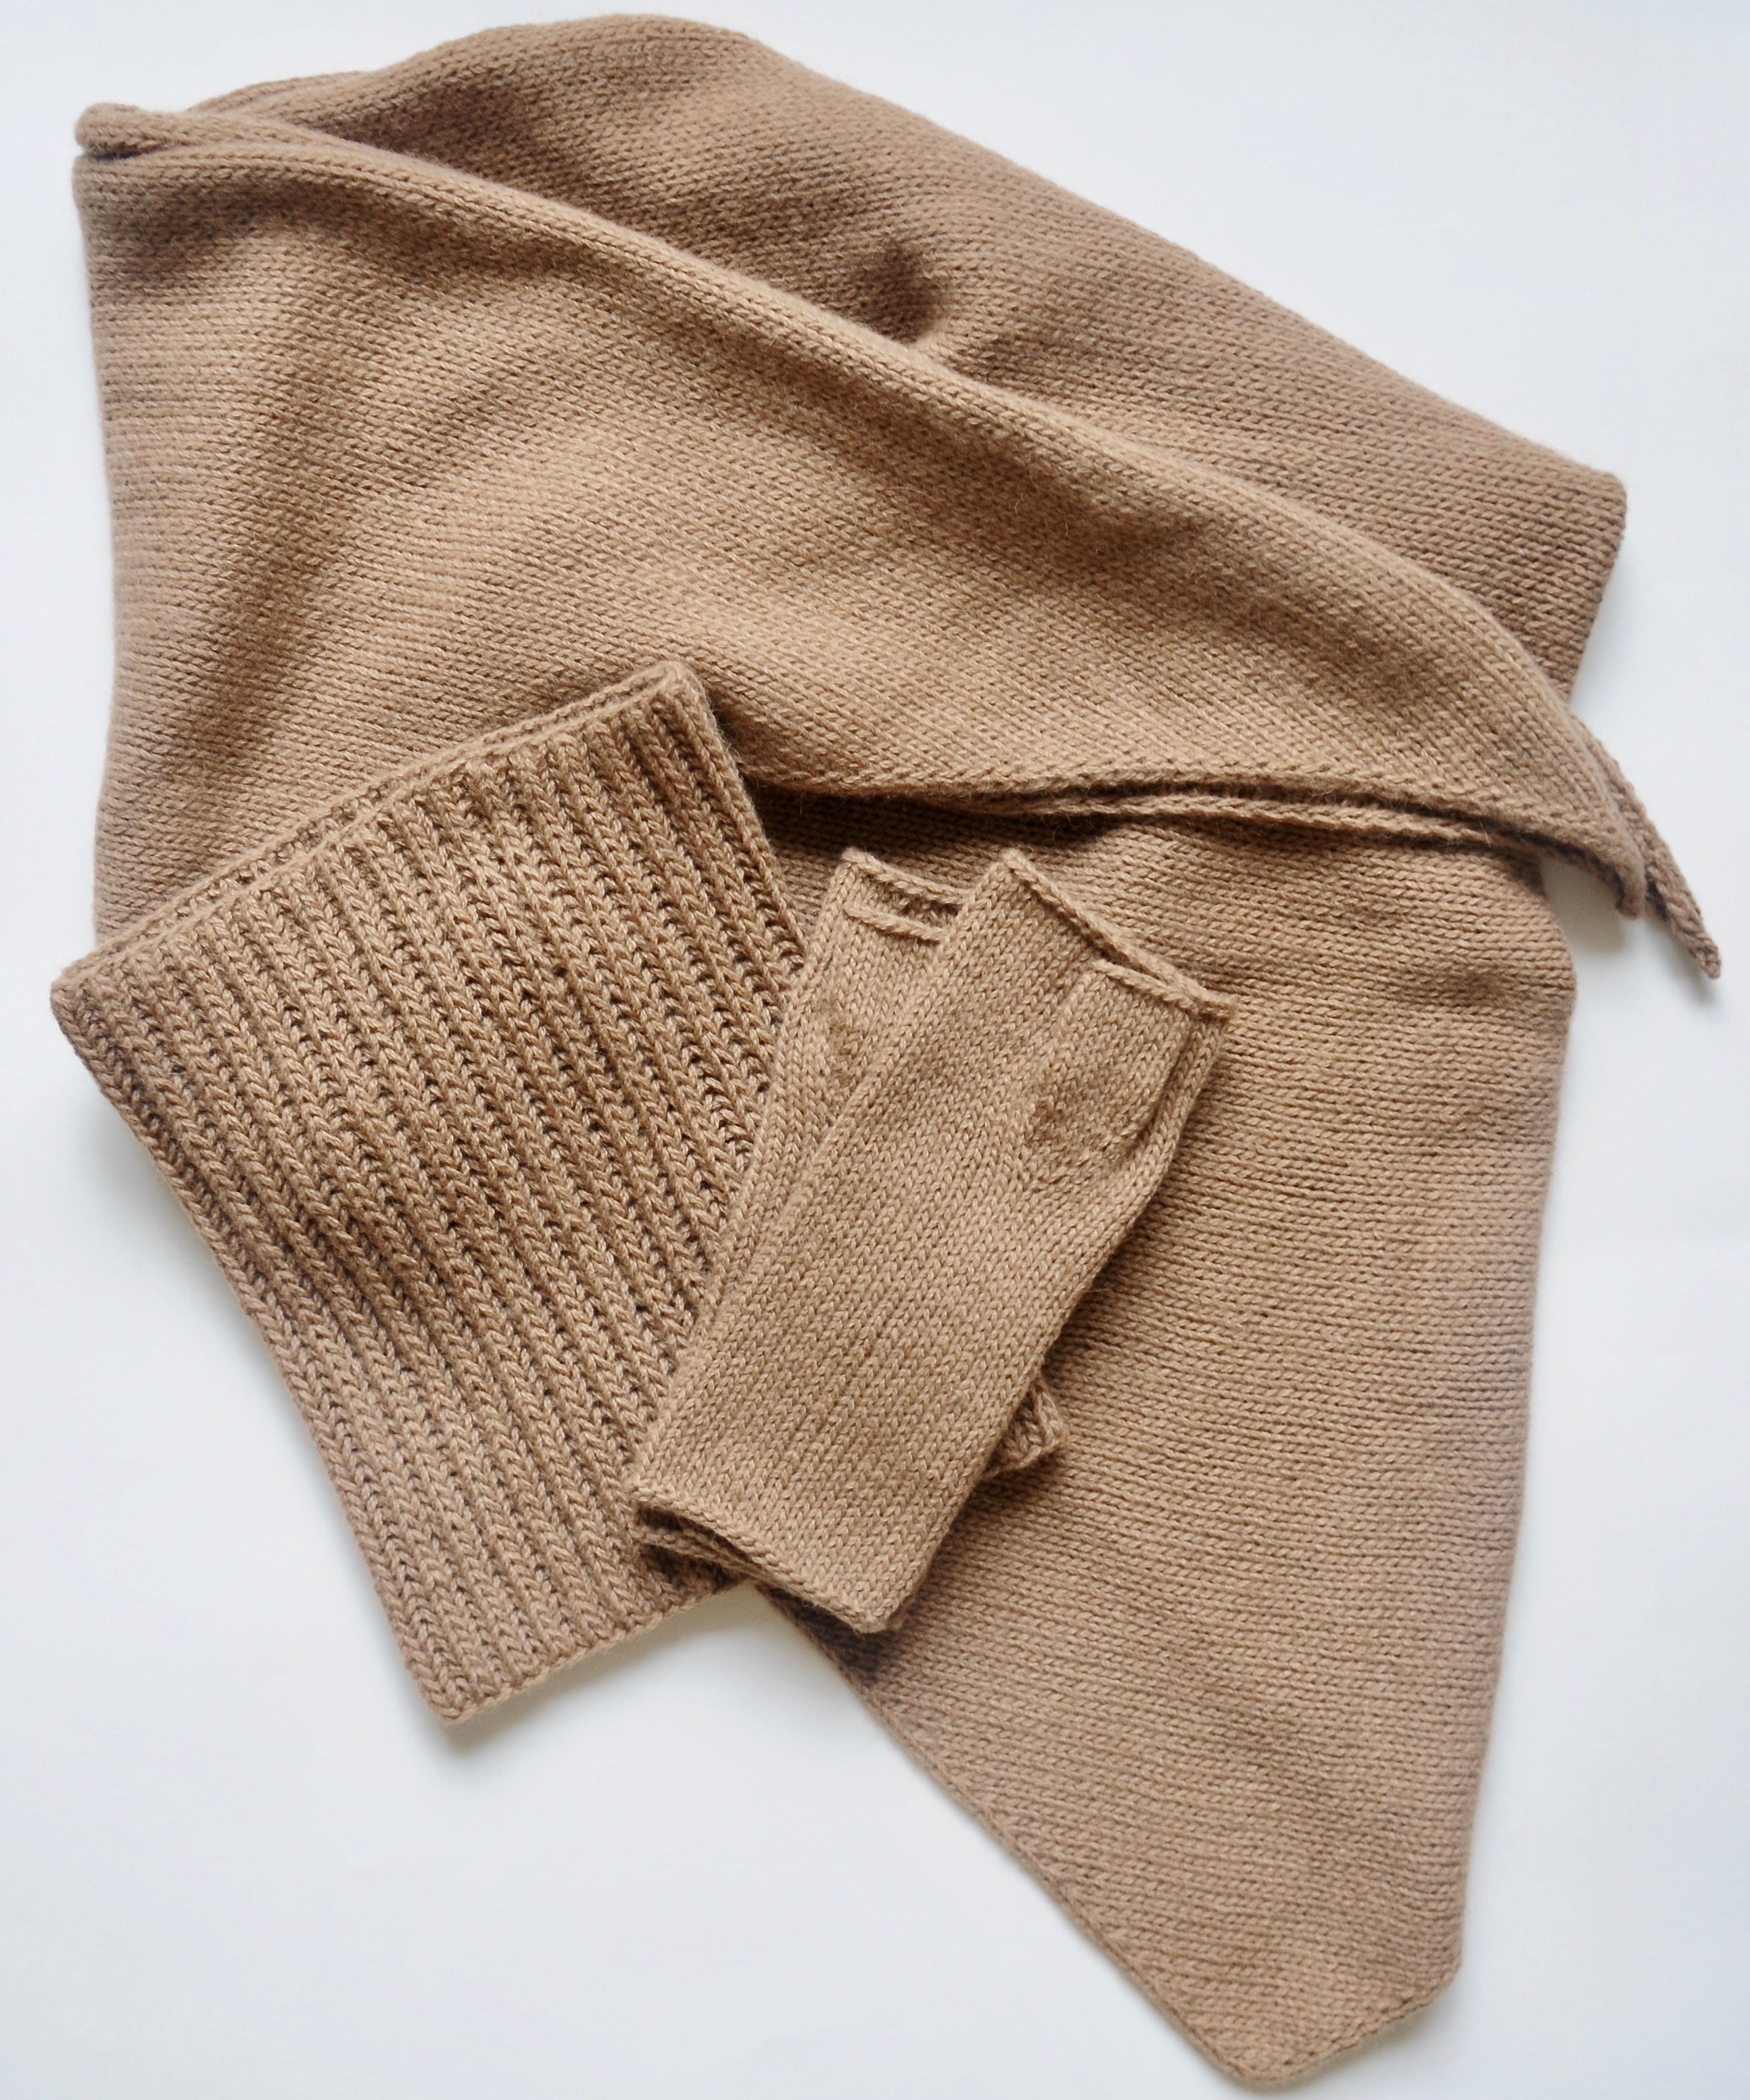 Camel-knitwear-made-in-the-uk-triangle-scarf-fishermans-scarf-fingerless-gloves